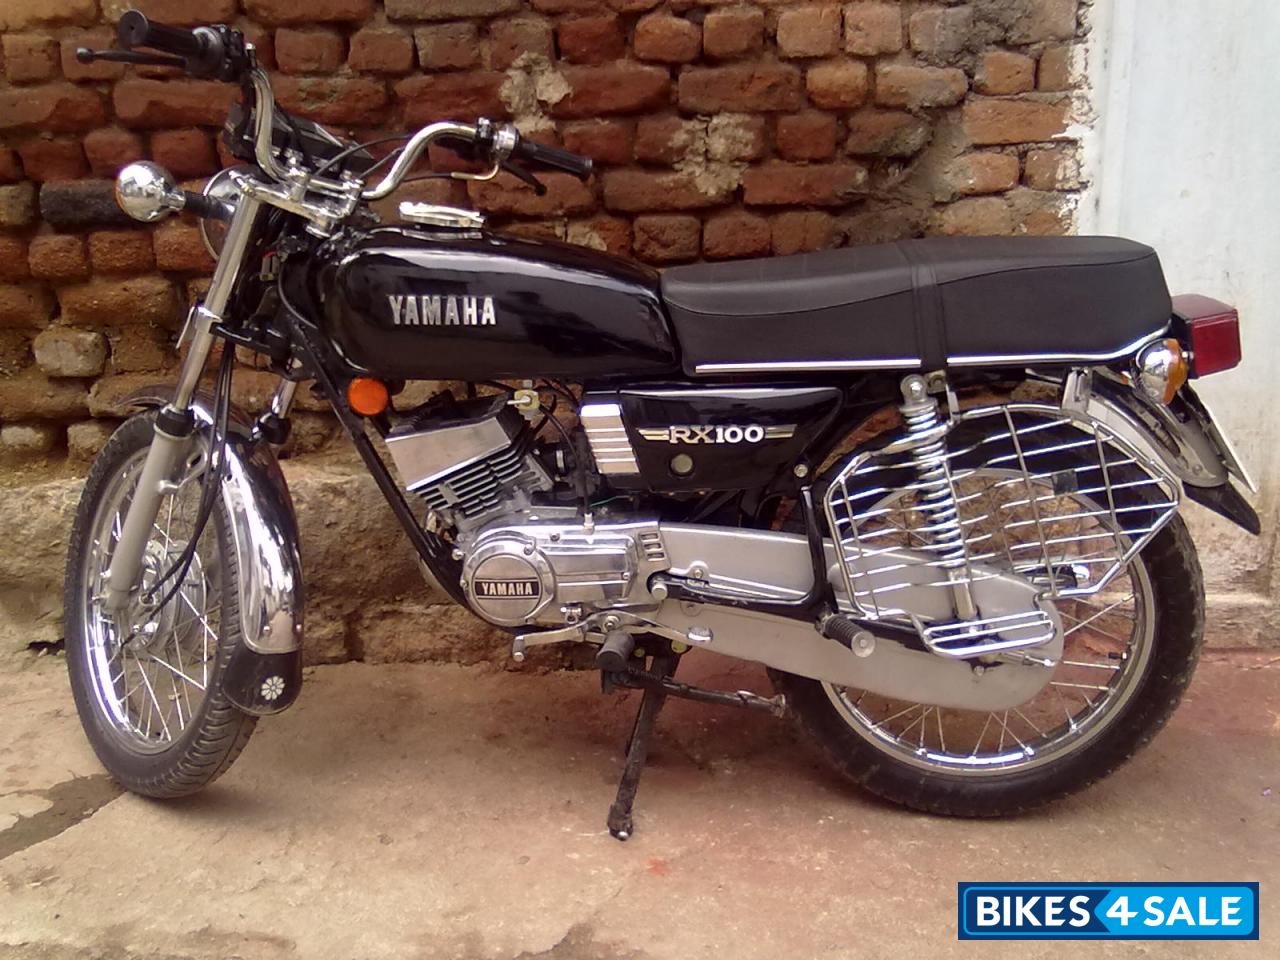 Used 1996 Model Yamaha Rx 100 For Sale In Hyderabad Id Black Colour Bikes4sale